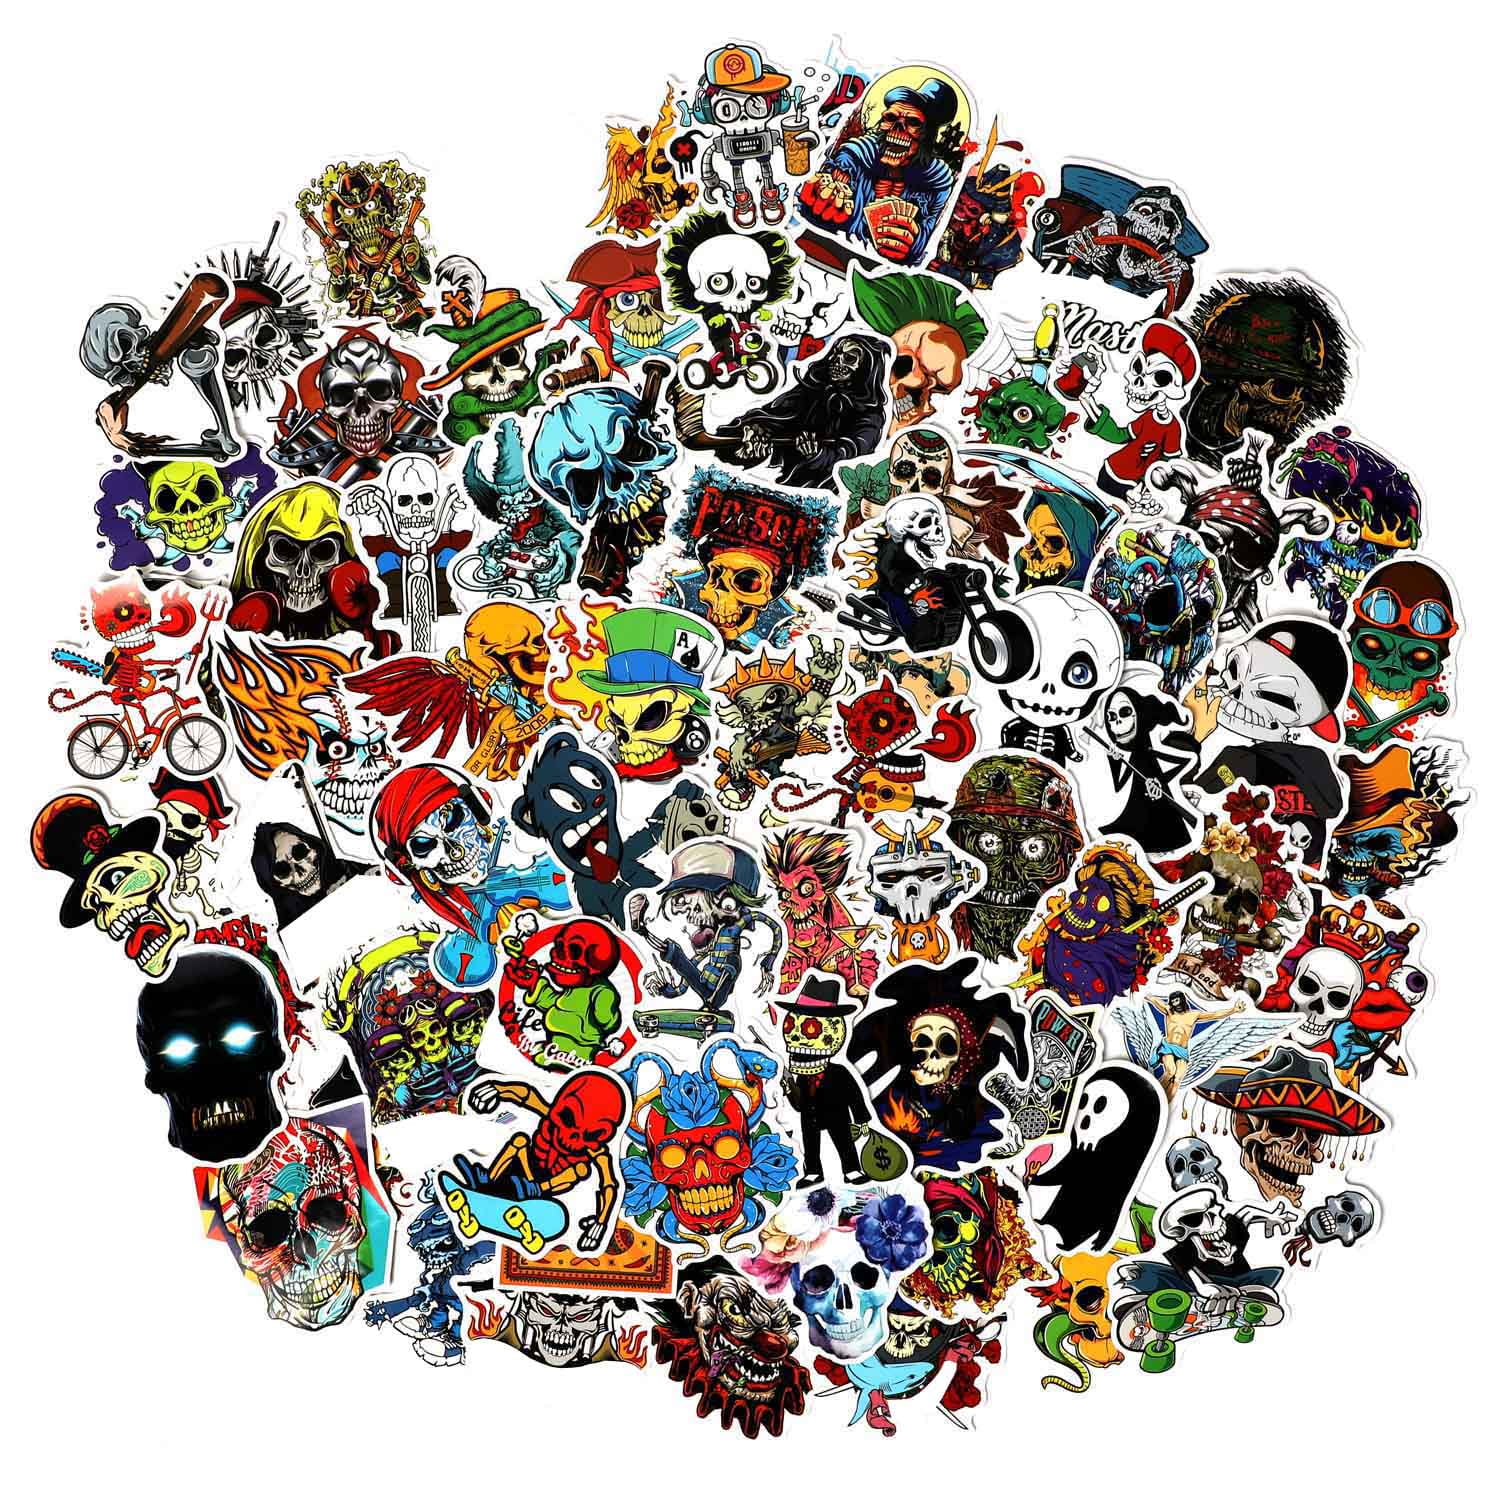 US SELLER 100pcs Stickers Motorcycle Skateboard Decal luggage sticker bomb pack 